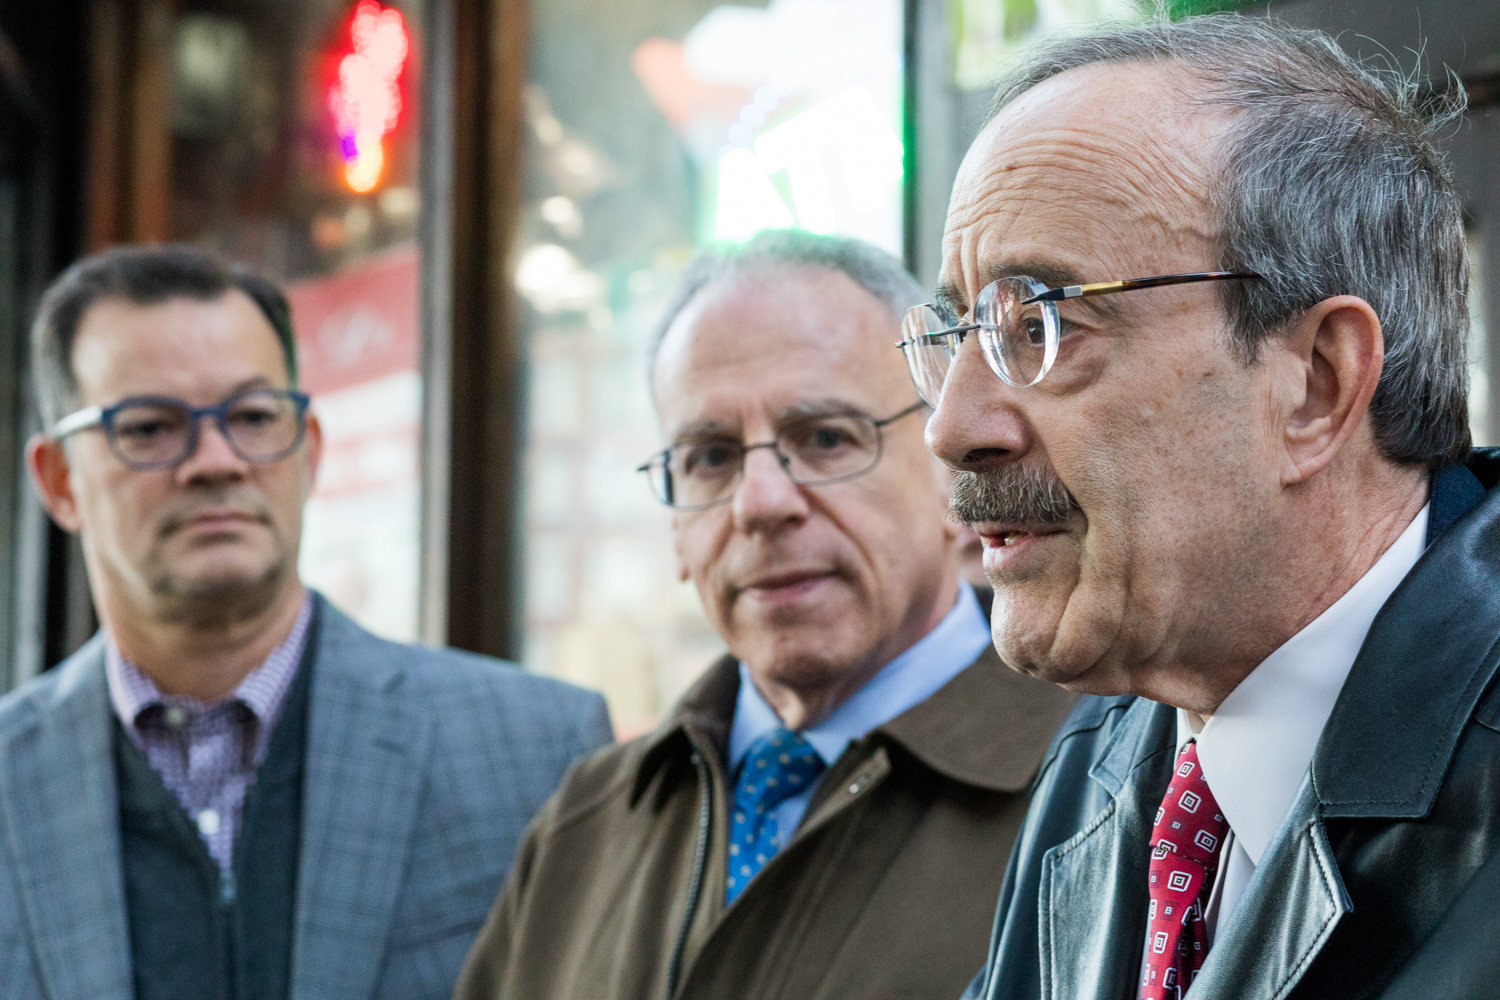 U.S. Rep. Eliot Engel, right, and Assemblyman Jeffrey Dinowitz, center, seen here at a 2018 press conference, held a virtual conference with each other last week to talk about a wide range of issues.